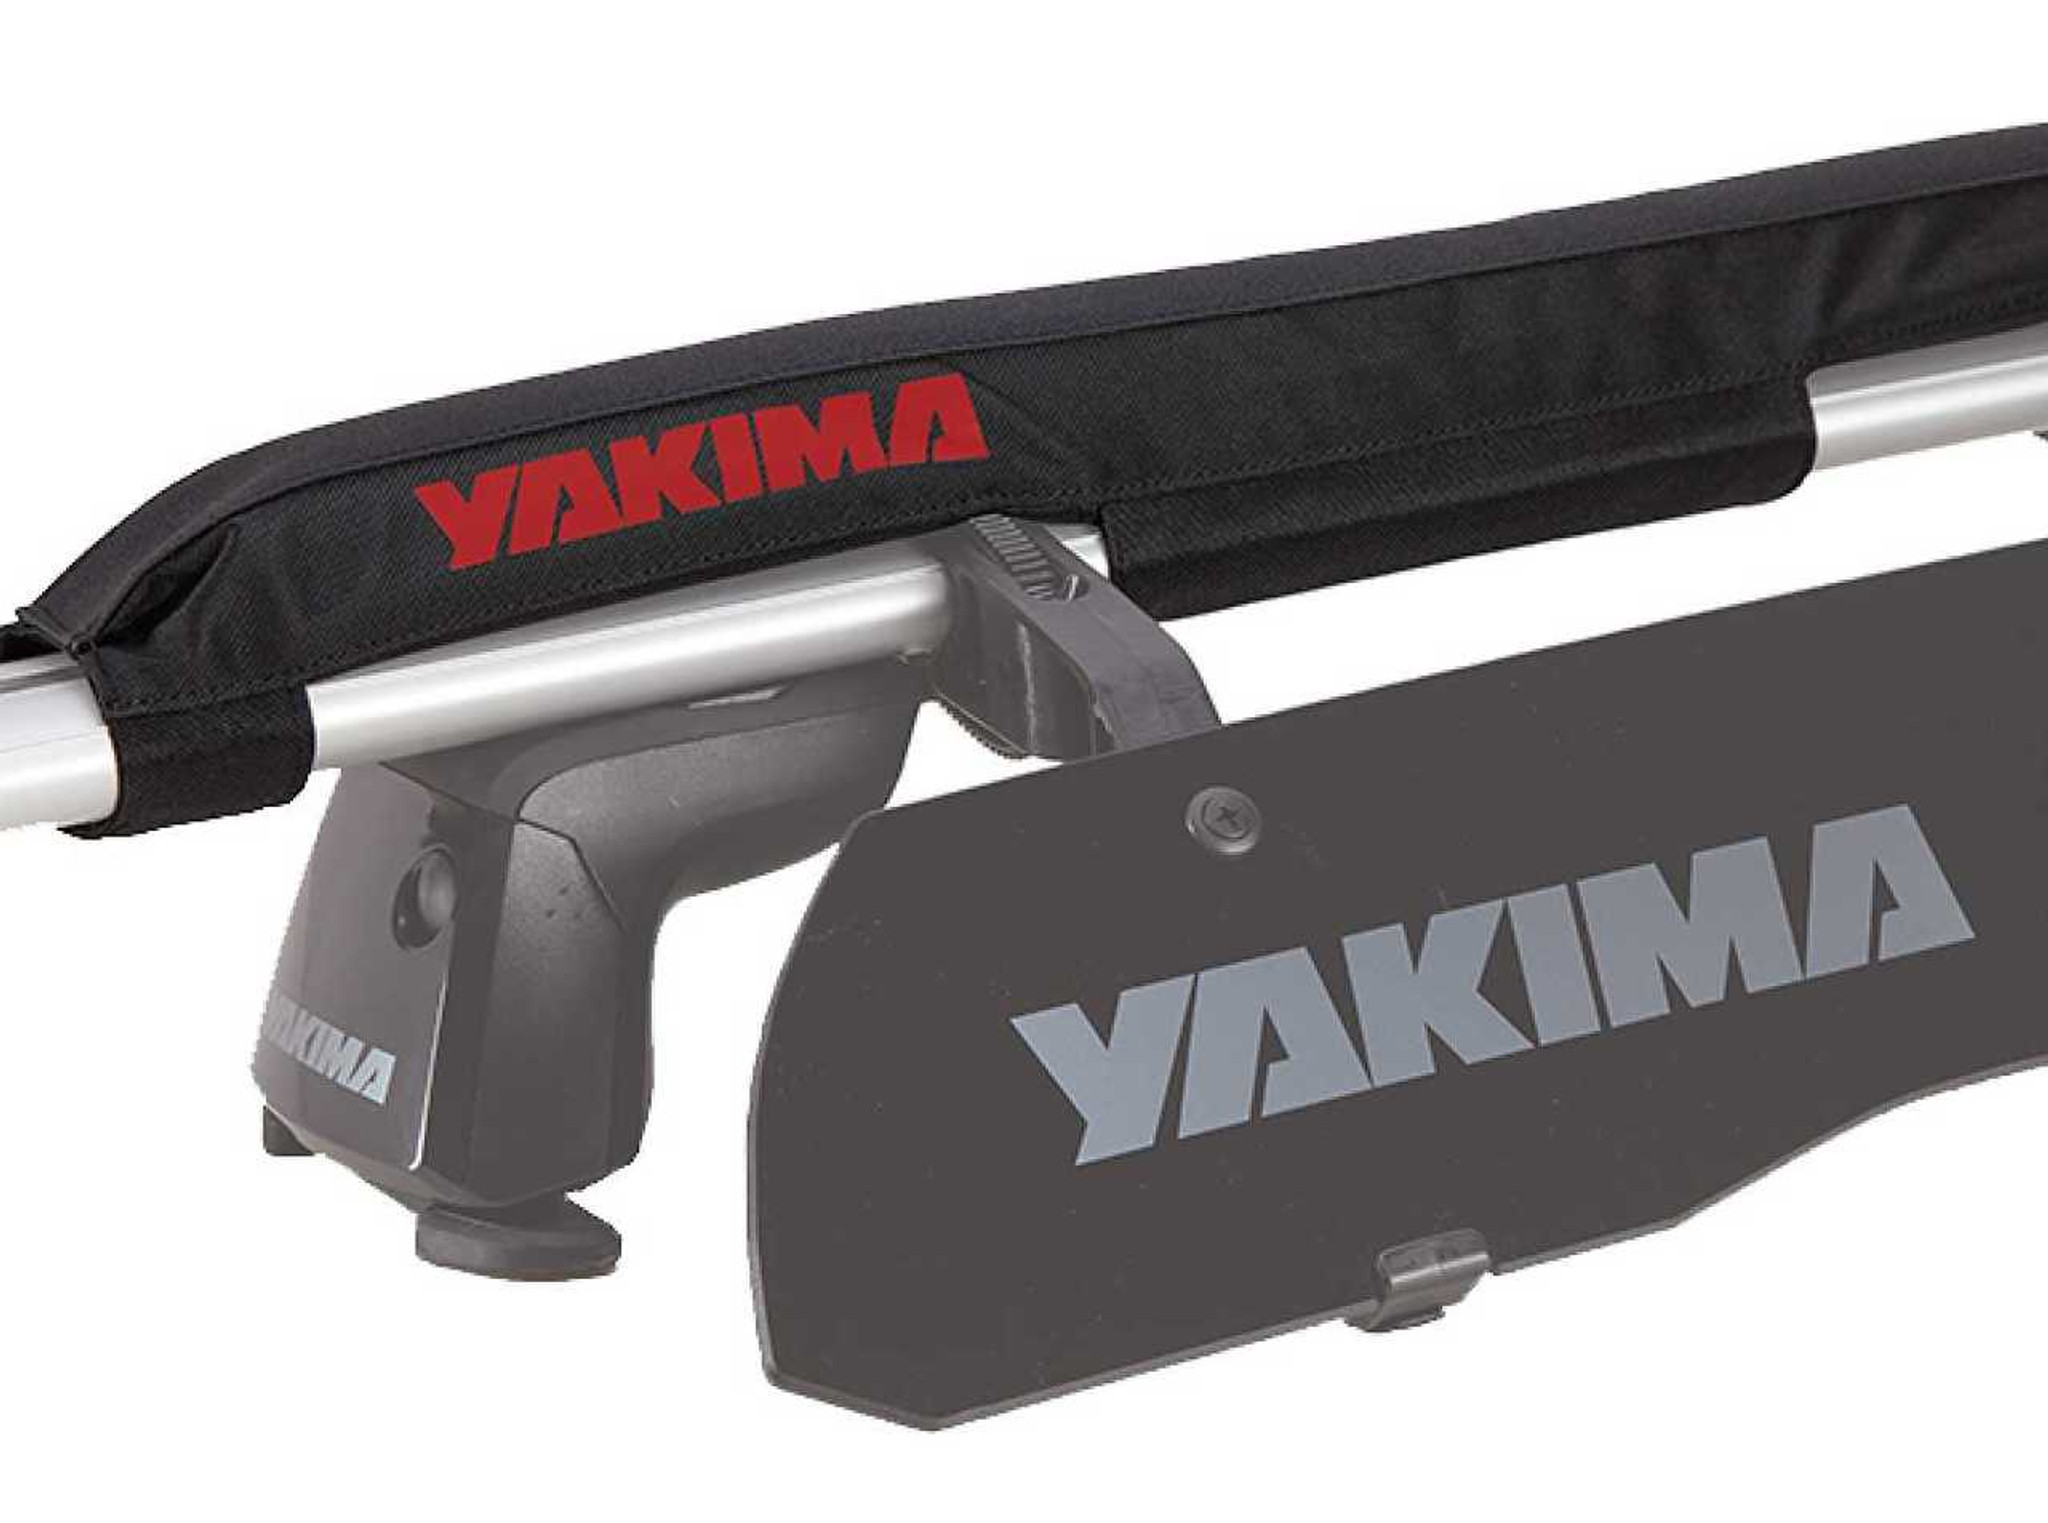 CrossBar Pads Yakima Secure and Protect Boats and Boards from Damage Aero 20 inch 